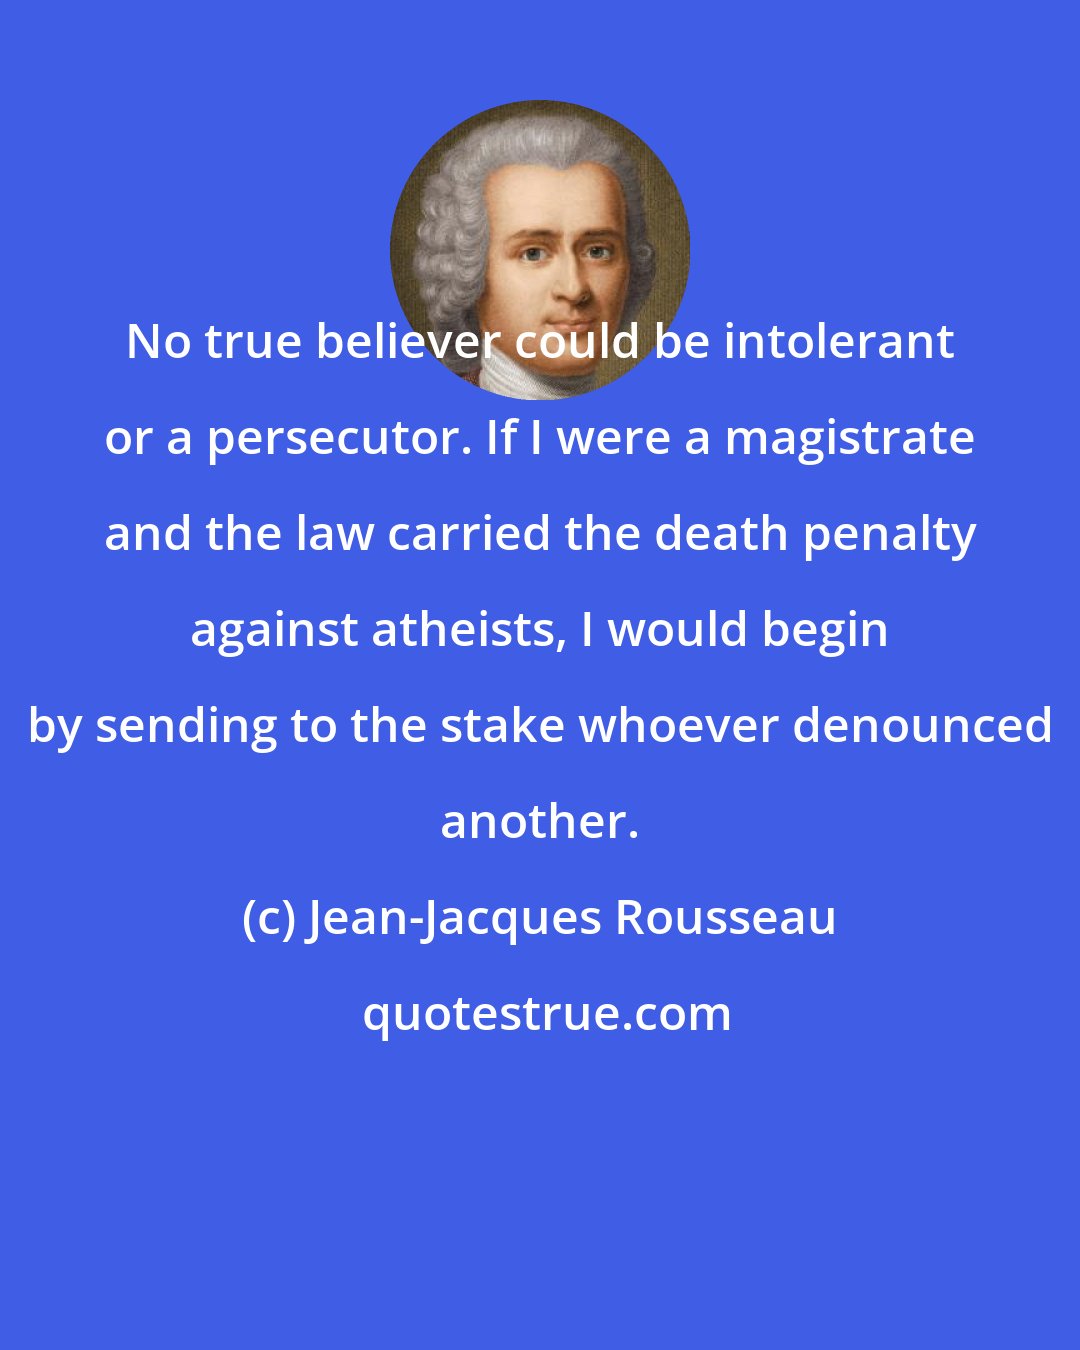 Jean-Jacques Rousseau: No true believer could be intolerant or a persecutor. If I were a magistrate and the law carried the death penalty against atheists, I would begin by sending to the stake whoever denounced another.